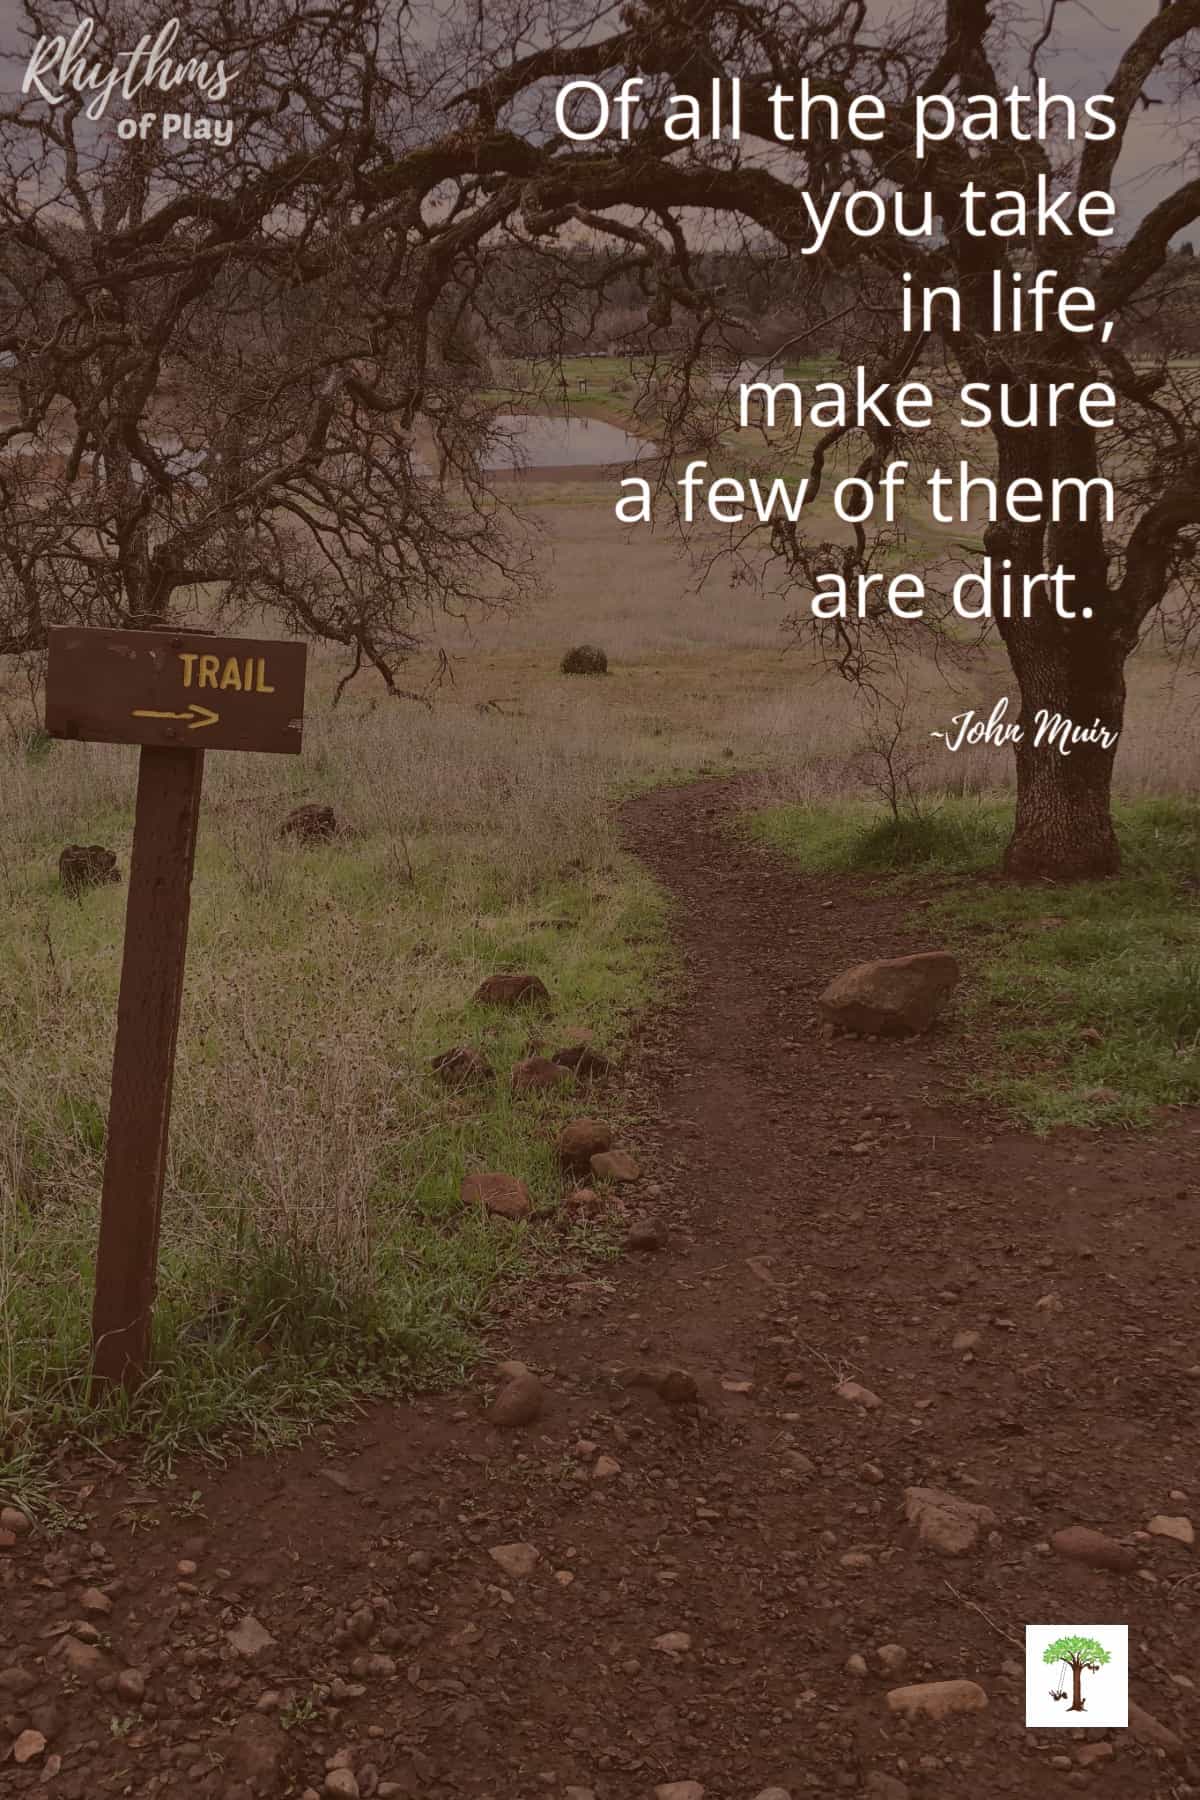 Hiking trail with J. Muir quote, "Of all the paths you take in life, make sure a few of them are dirt.